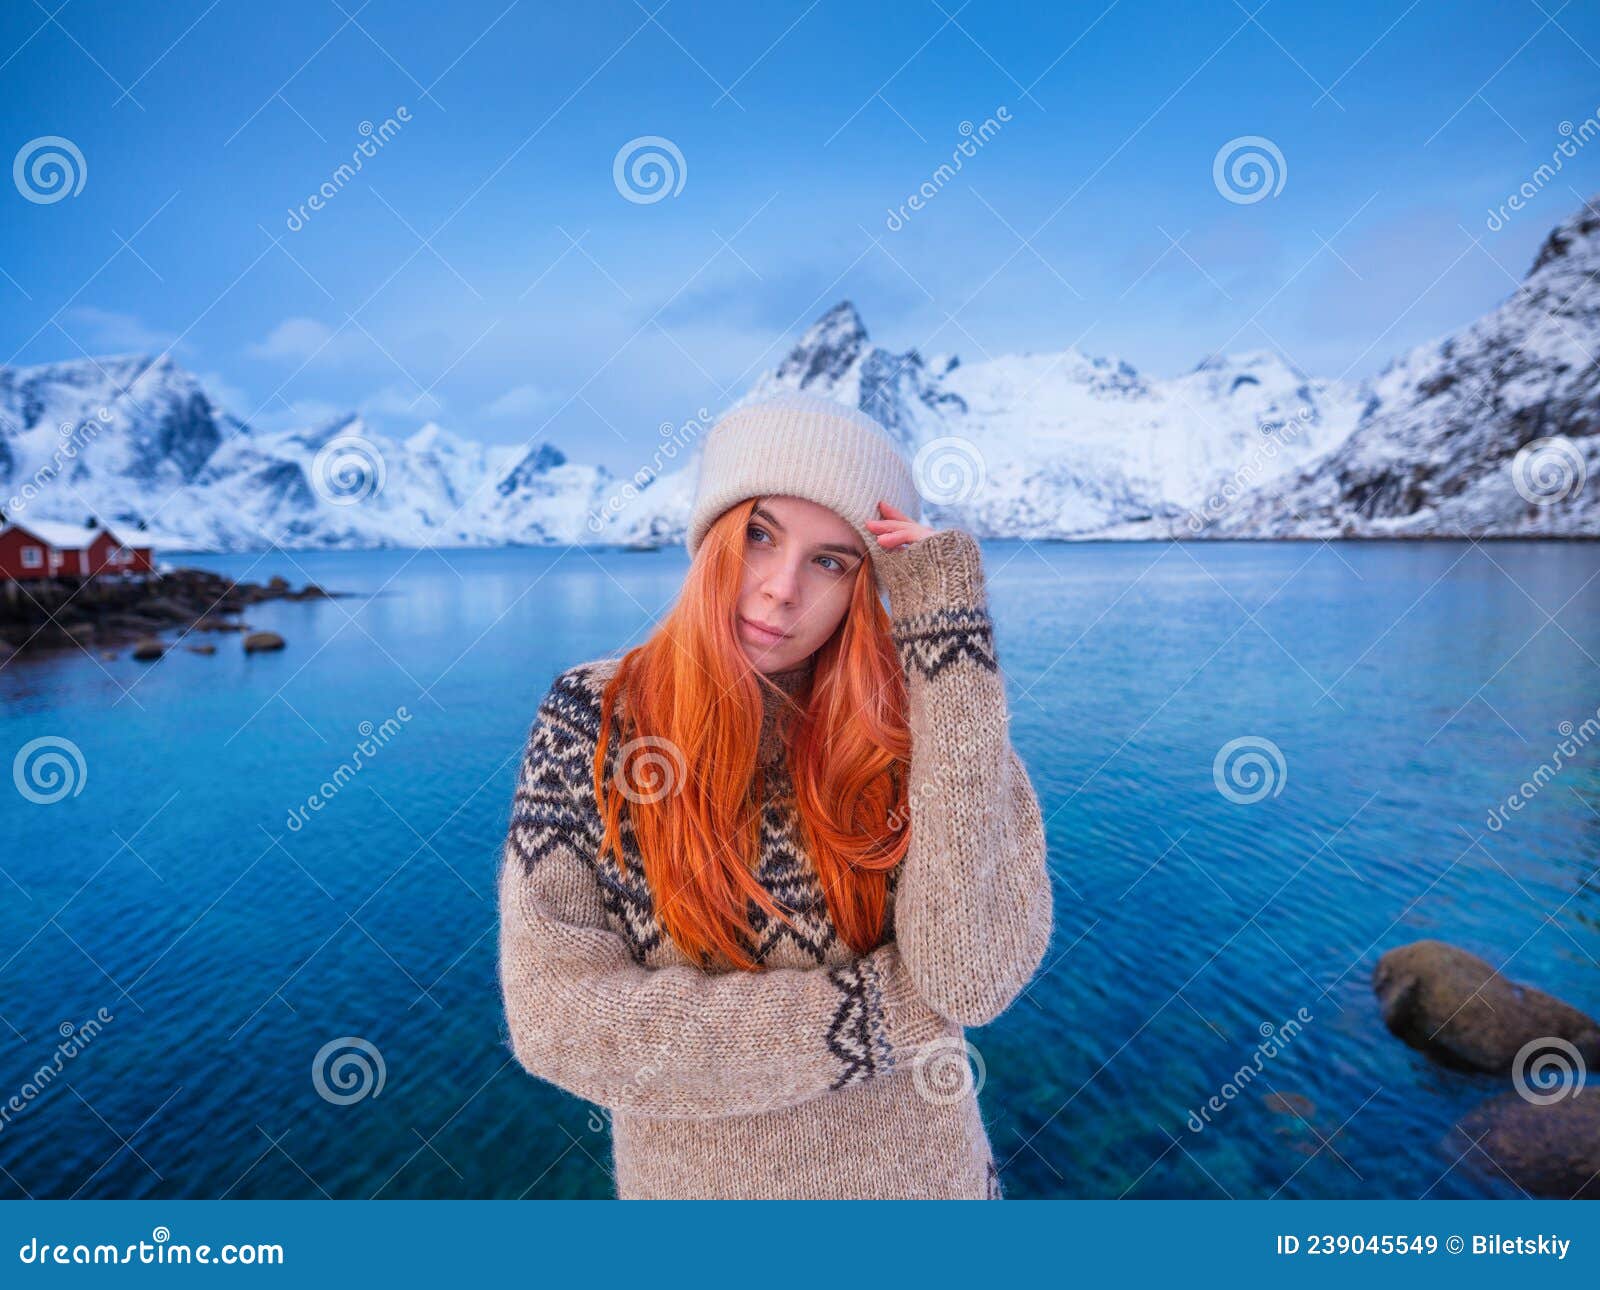 Native Icelandic Girl with Red Hair. National Traditional Clothing ...